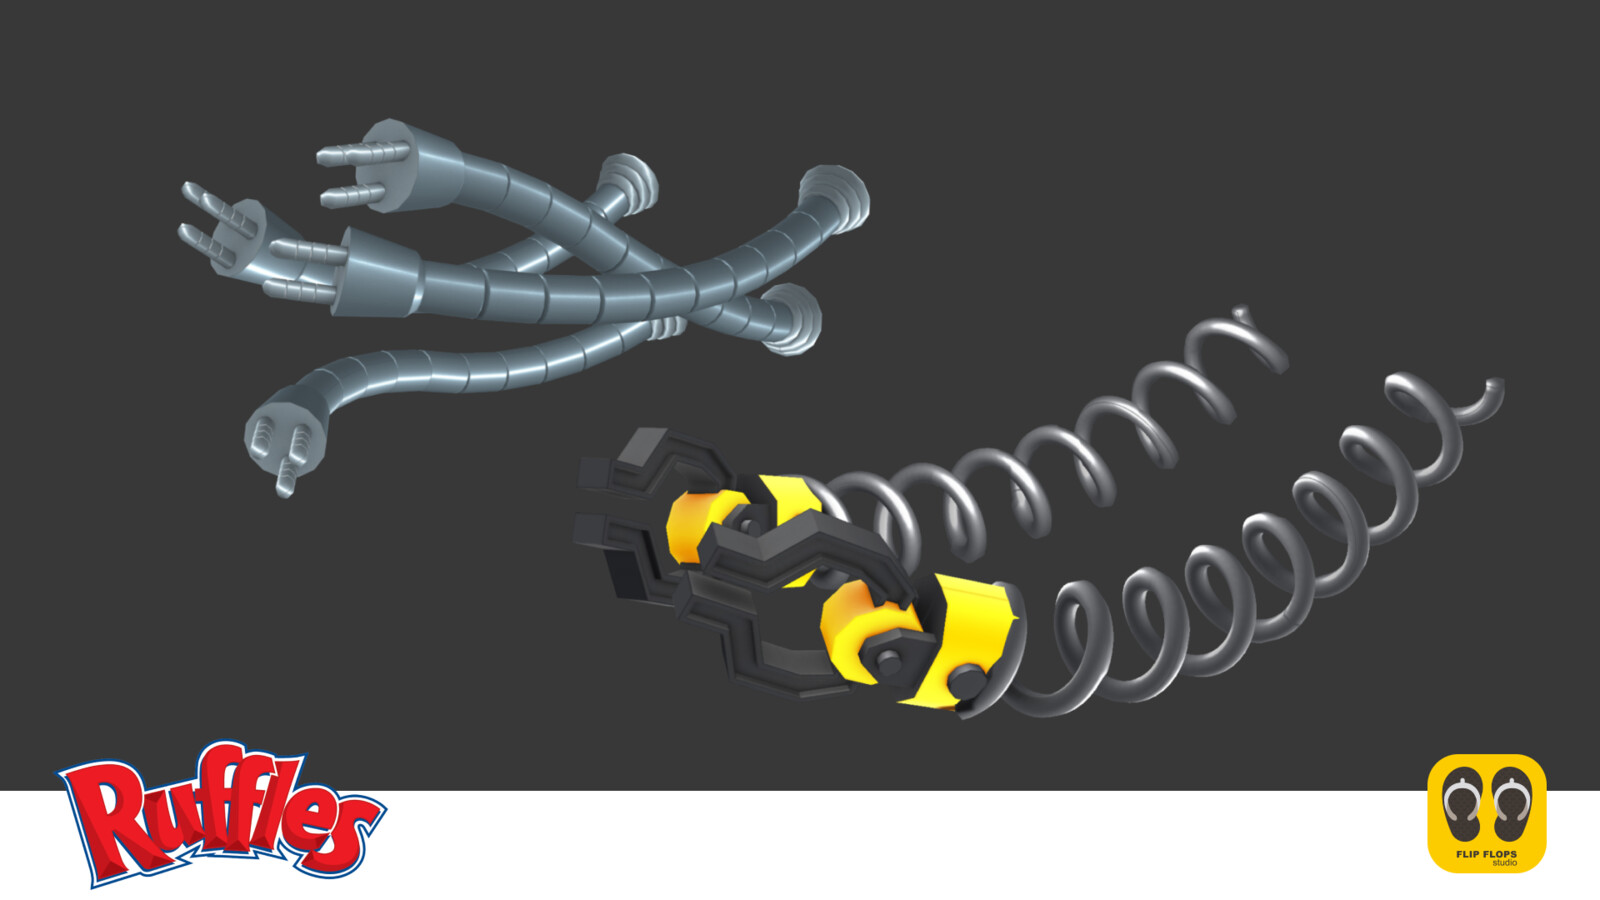 3D Modeling, Rigging, and Animation of the Cartoon Arms